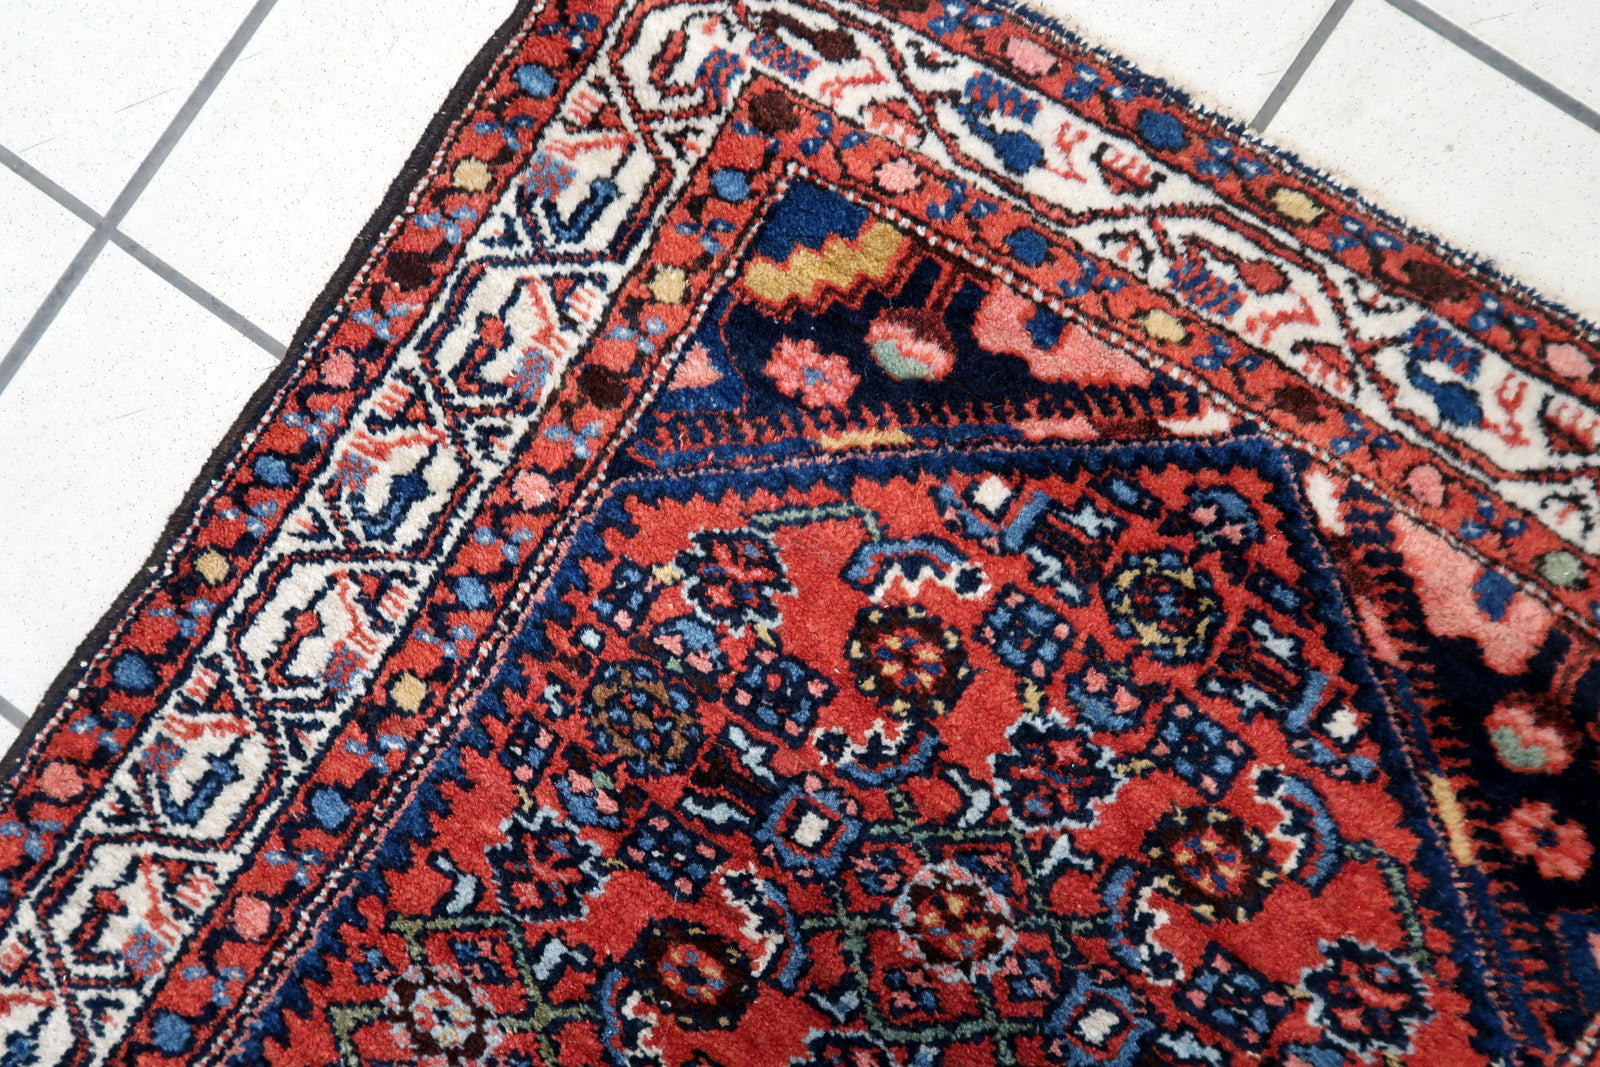 Side view of the small rectangular rug made from high-quality wool fibers